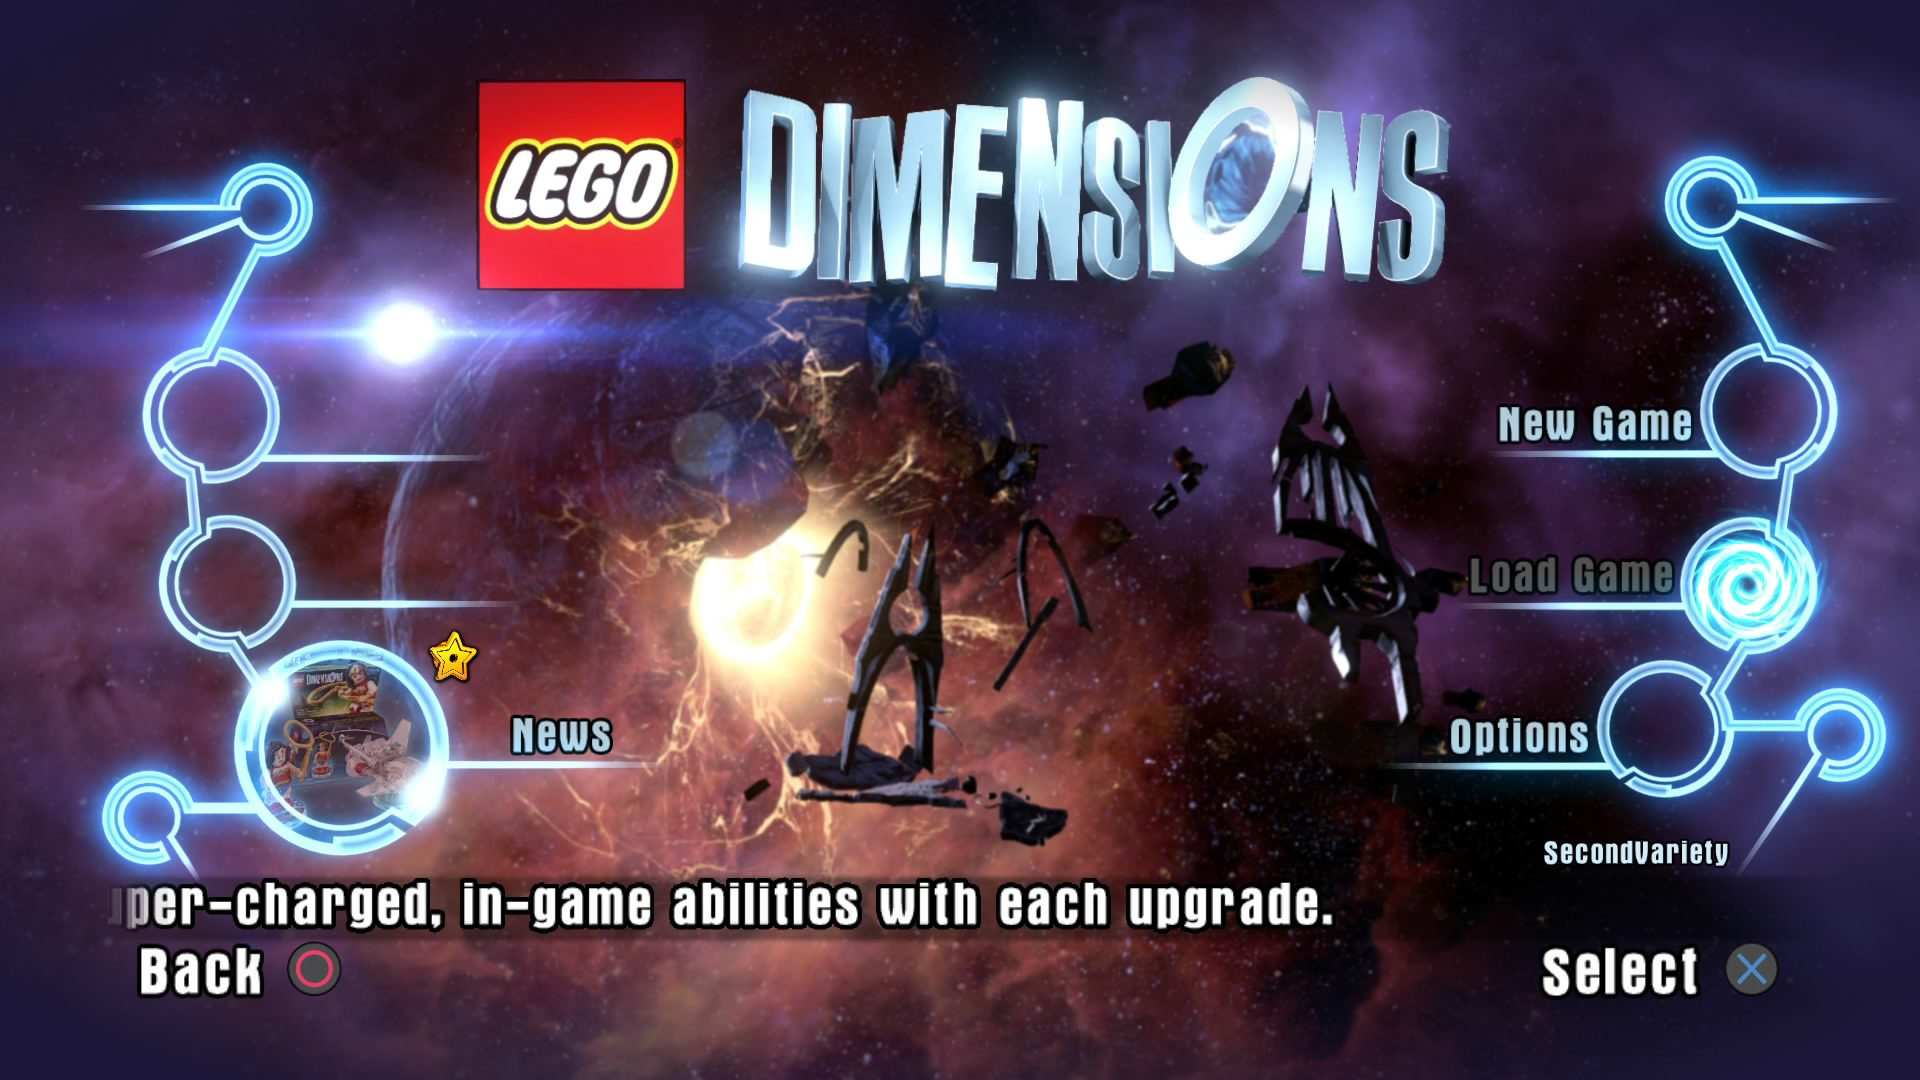 LEGO Dimensions PS4 title update